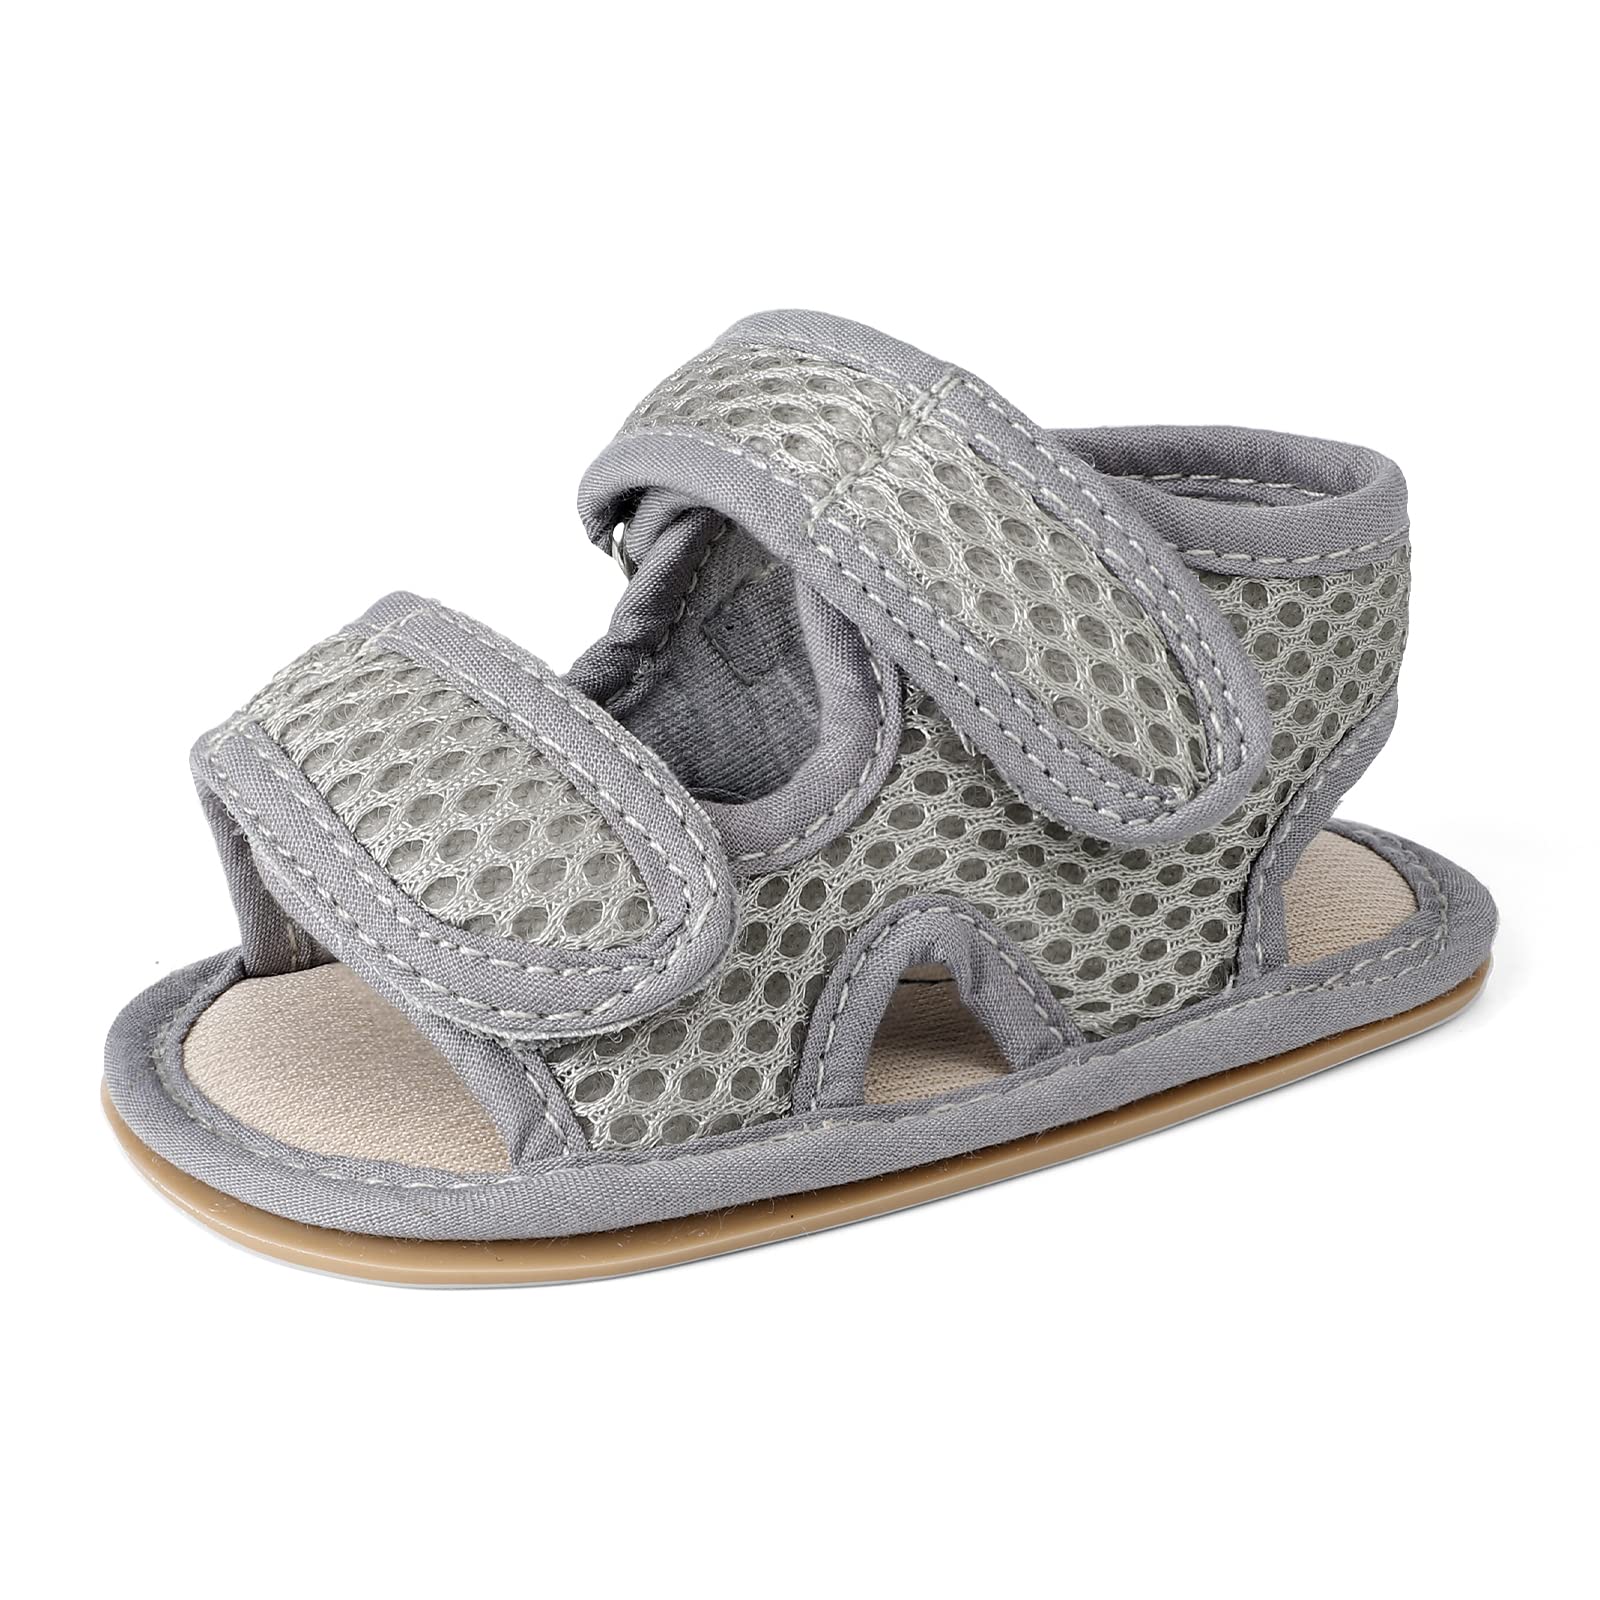 Cartoon Boys Summer Infant Sandals Soft Soled, Anti Kick, Barefoot Beach  Shoes For Leisure And Fun 210713 From Cong06, $13.13 | DHgate.Com